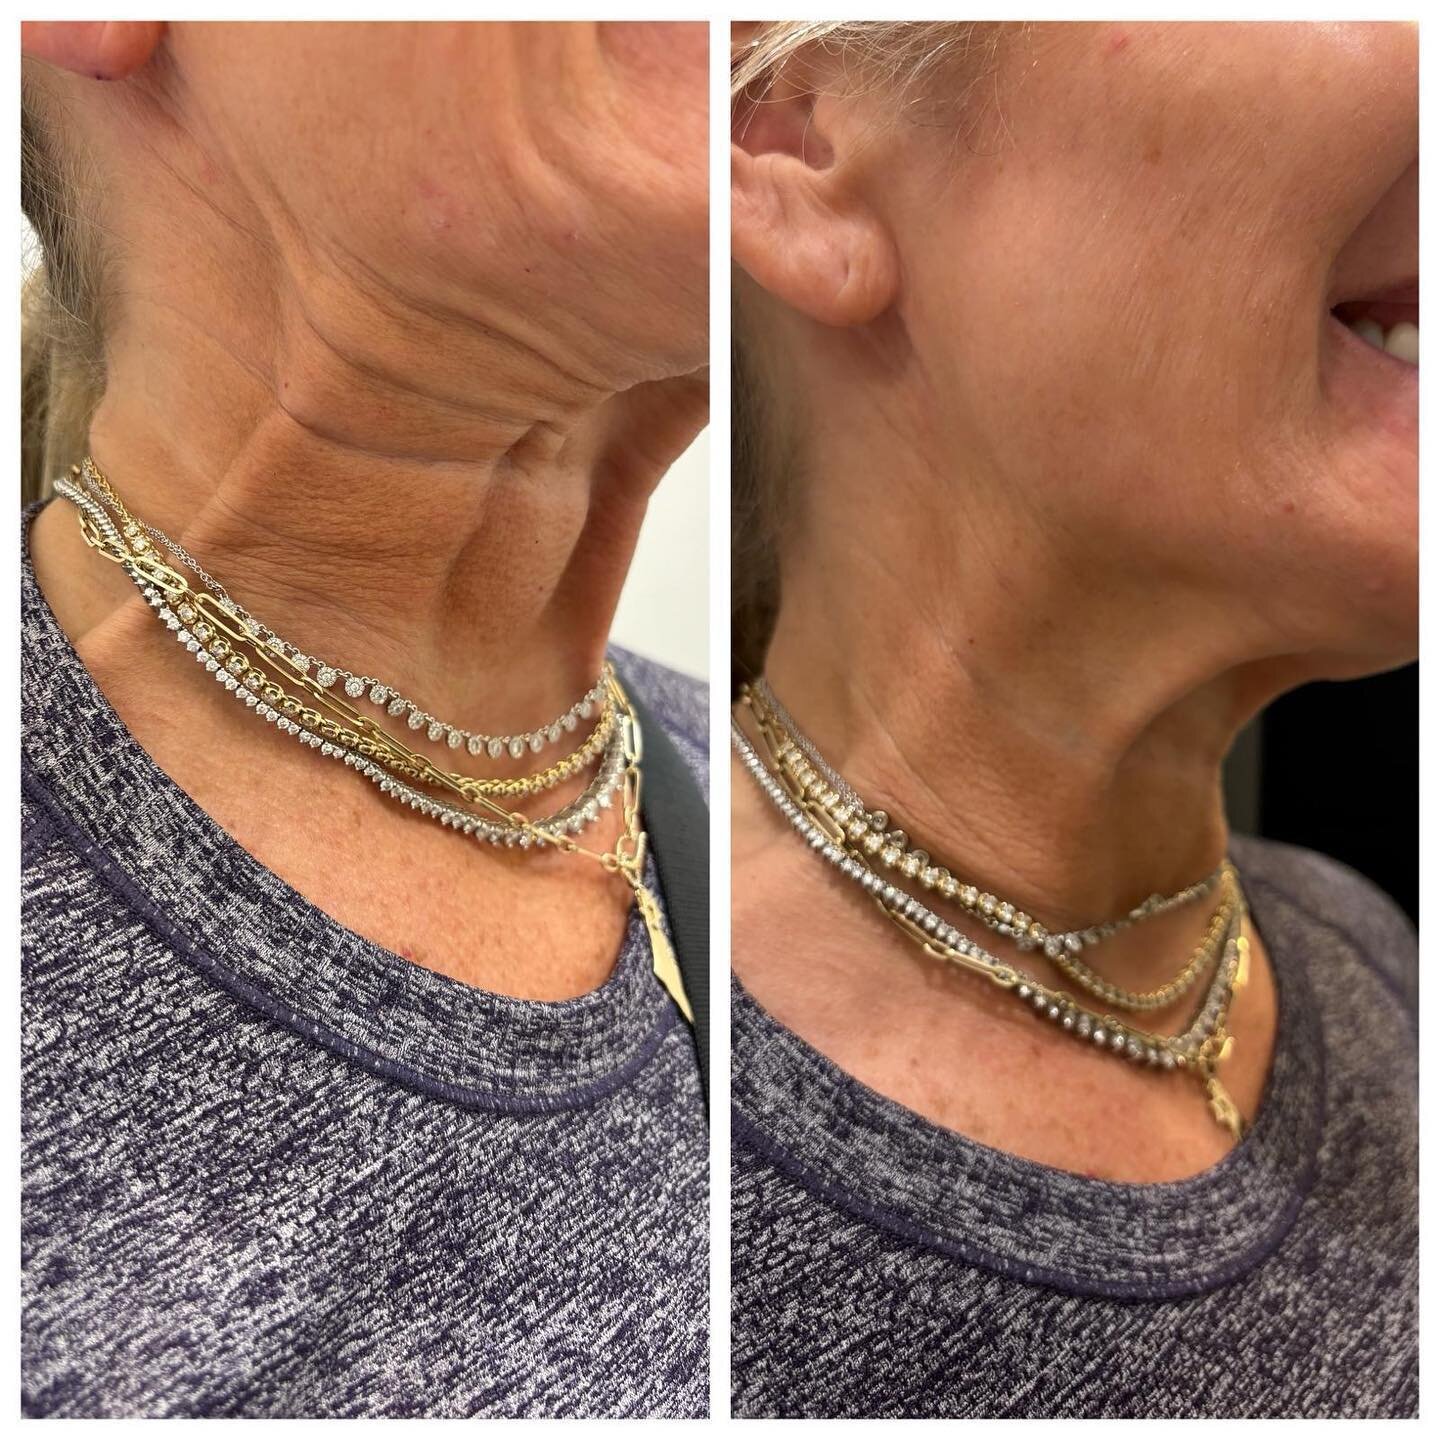 Tox treatment on neck bands, also known as &ldquo;platysmal bands&rdquo; involves injecting a small amount of neurotoxins into the muscles that cause the neck lines to form. 
These neck bands are the result of aging 👵🏼, sun damage ☀️, or genetics ?